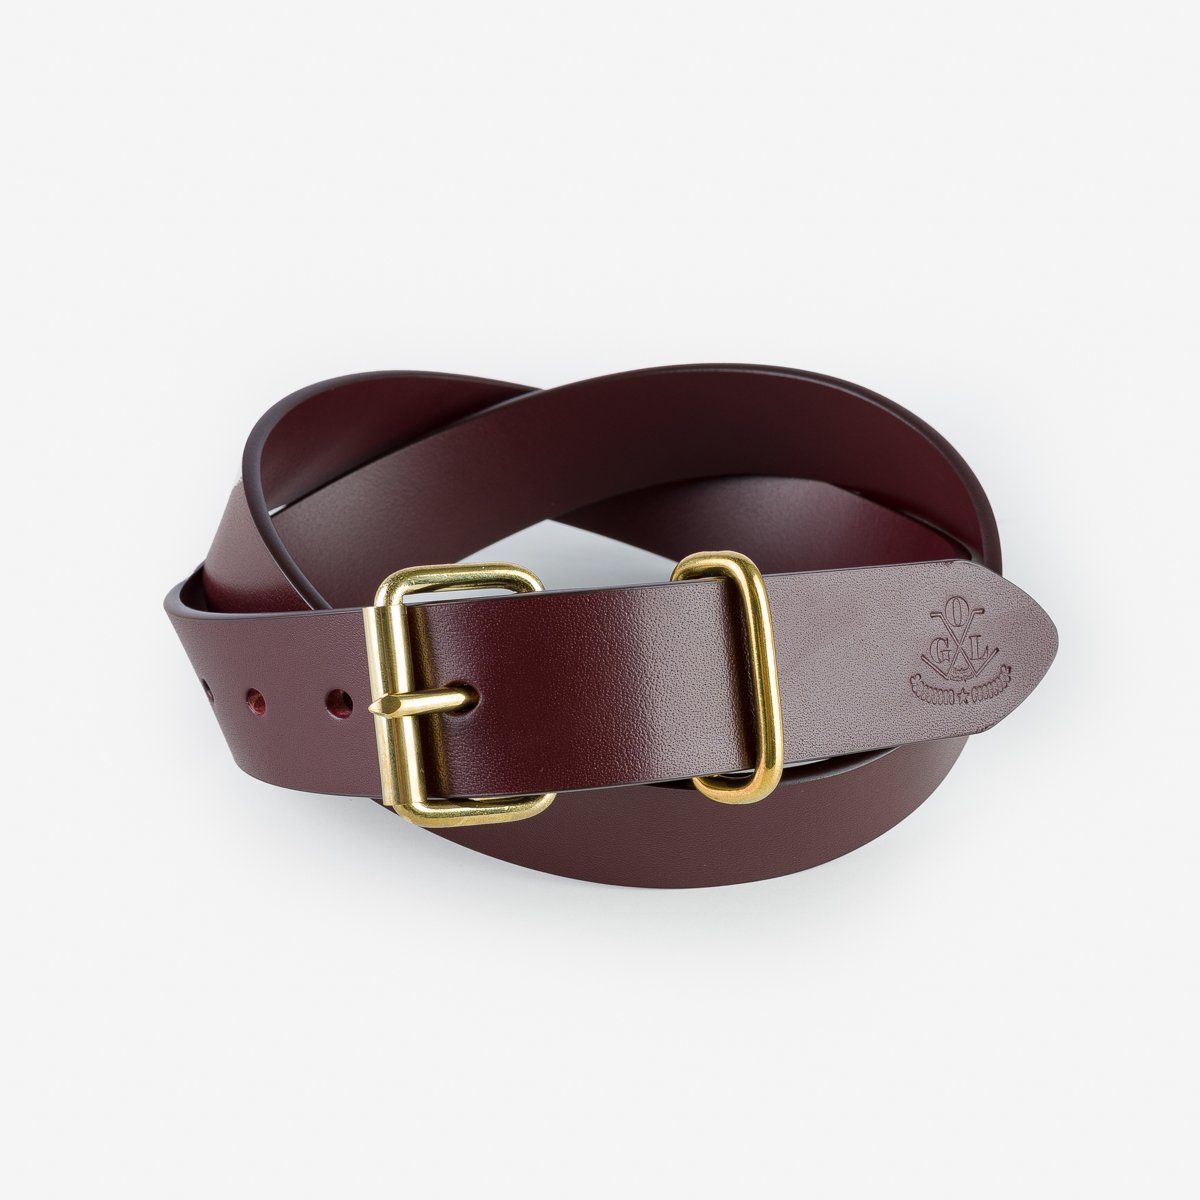 OGL Single Prong Brass Buckle Leather Belt Hand Dyed Brown